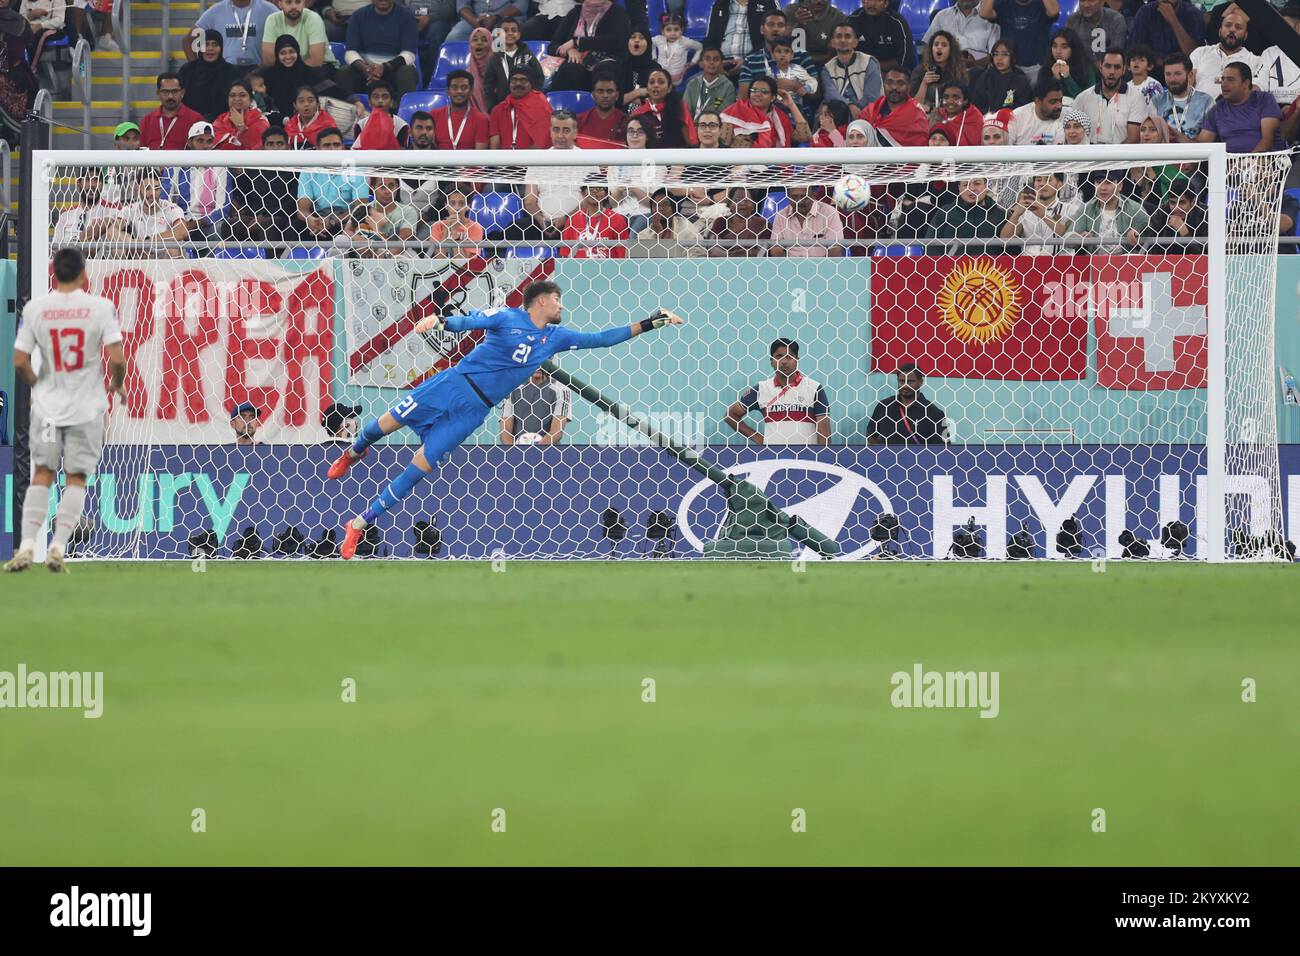 Doha, Qatar. 2nd Dec, 2022. Switzerland's goalkeeper Gregor Kobel (R) fails to save a goal by Aleksandar Mitrovic of Serbia during the Group G match between Serbia and Switzerland at the 2022 FIFA World Cup at Stadium 974 in Doha, Qatar, Dec. 2, 2022. Credit: Xu Zijian/Xinhua/Alamy Live News Stock Photo